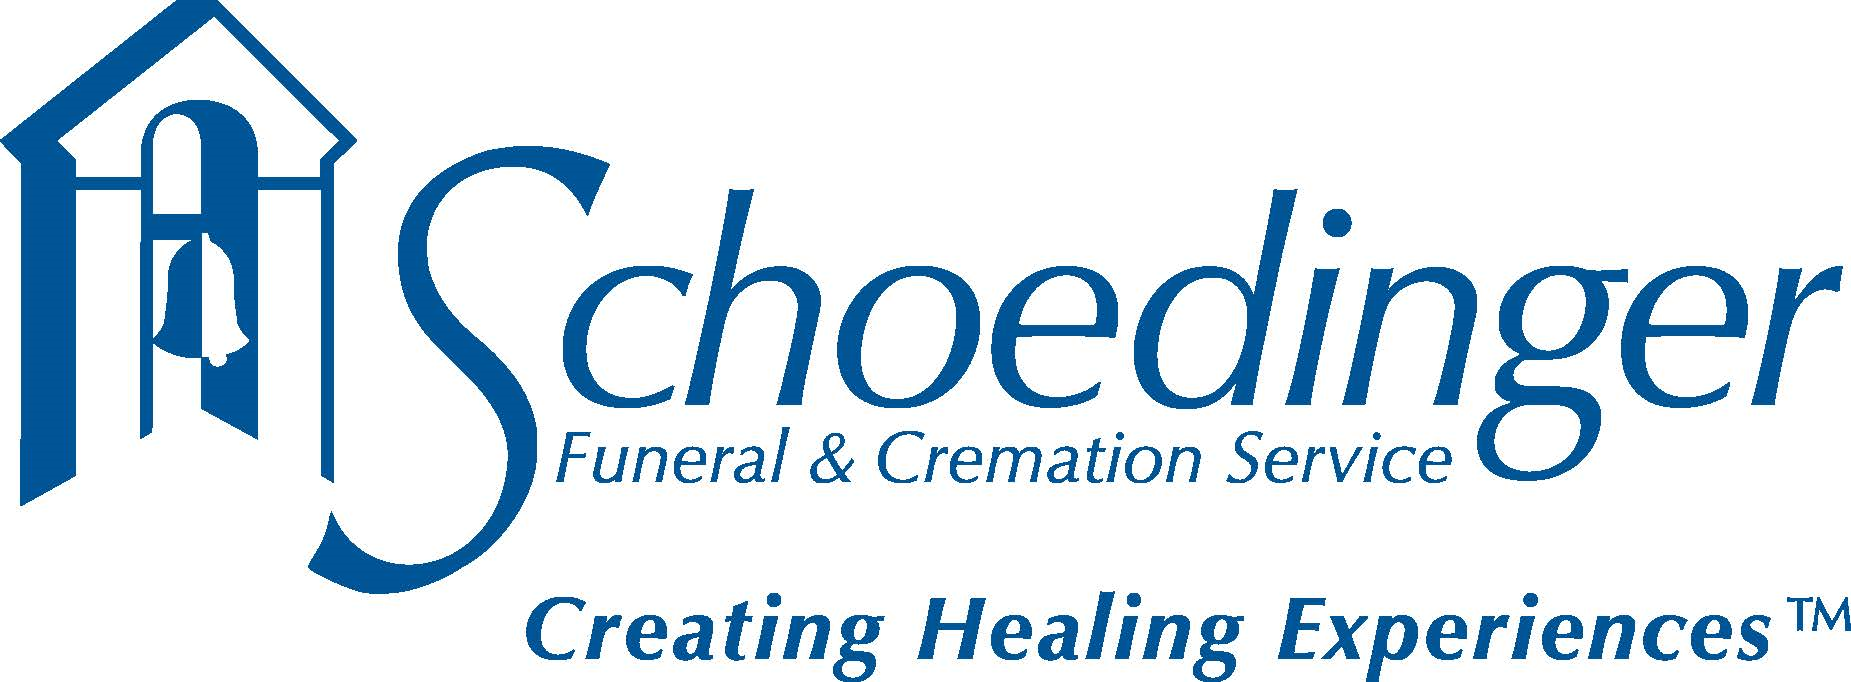 Schoedinger Funeral and Cremation Service logo